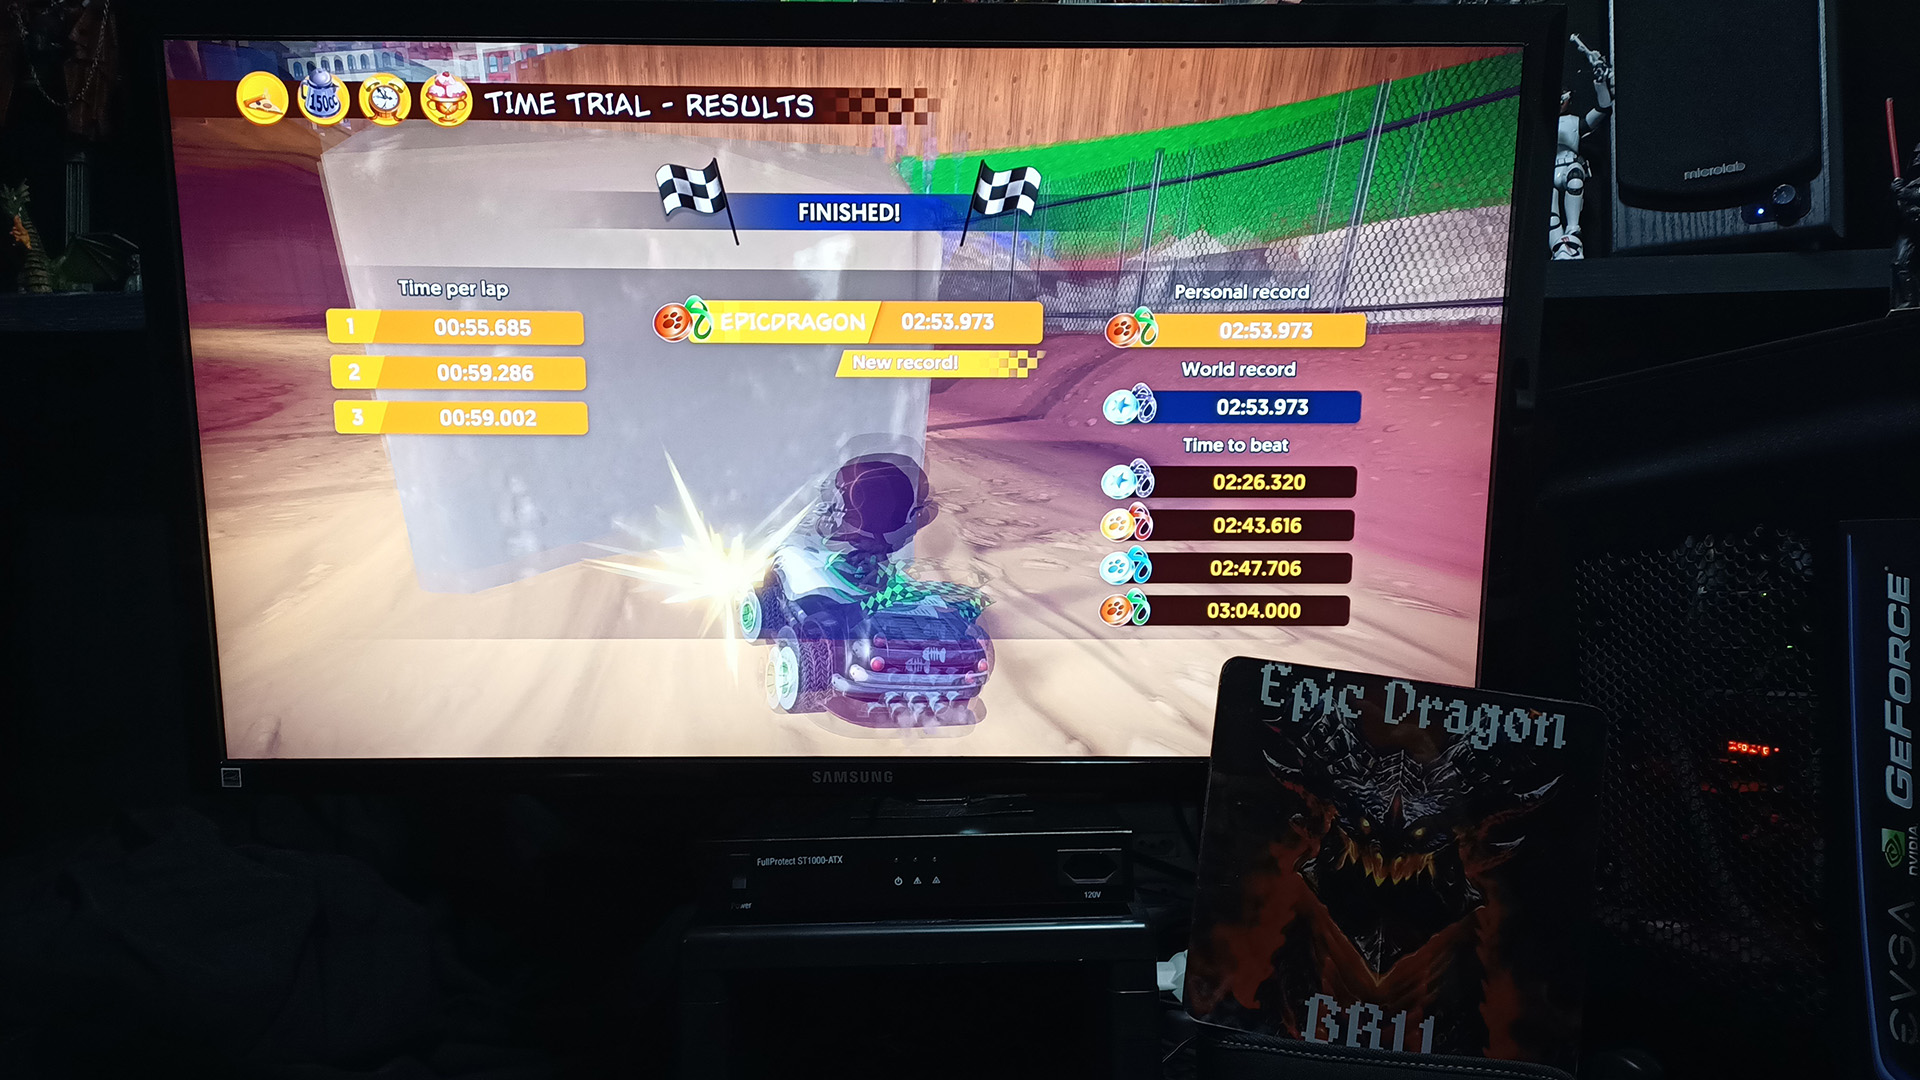 EpicDragon: Garfield Kart Furious Racing: Prohibited Site [Time Trial: 3 Laps] (PC) 0:02:53.973 points on 2022-08-14 14:59:47